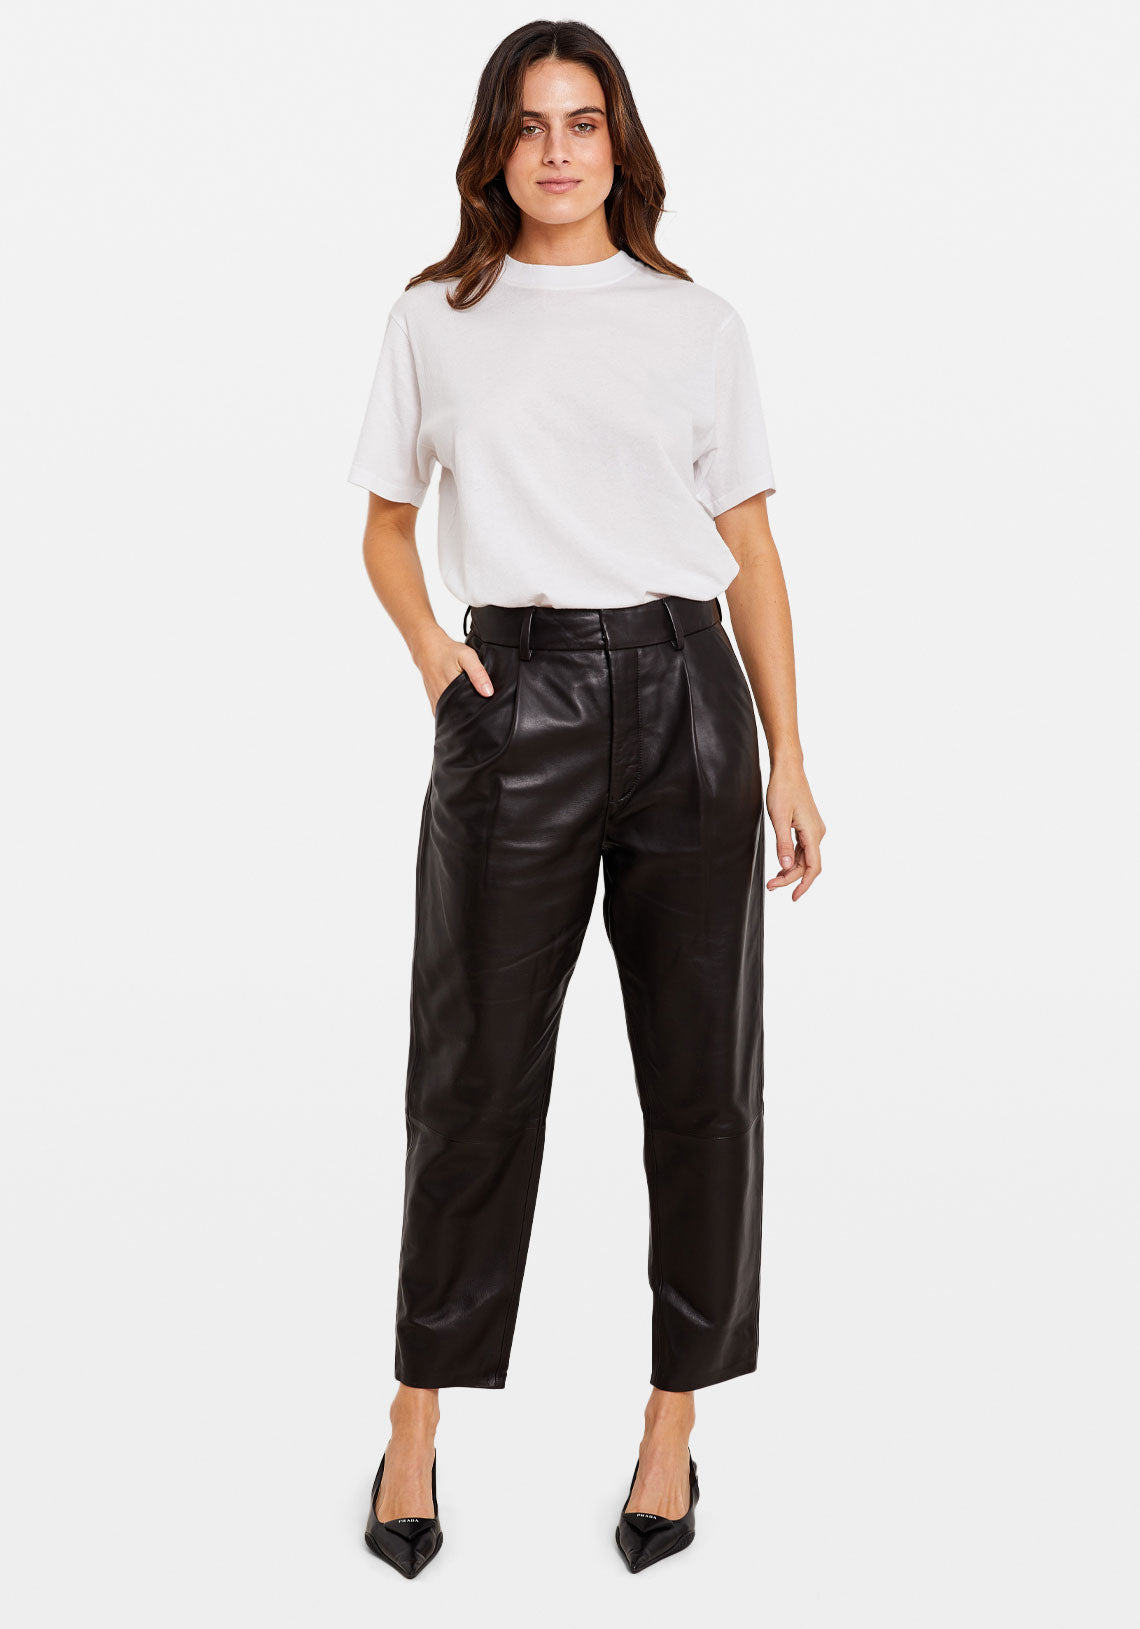 Going Somewhere Faux Leather Pant 32 - Cream